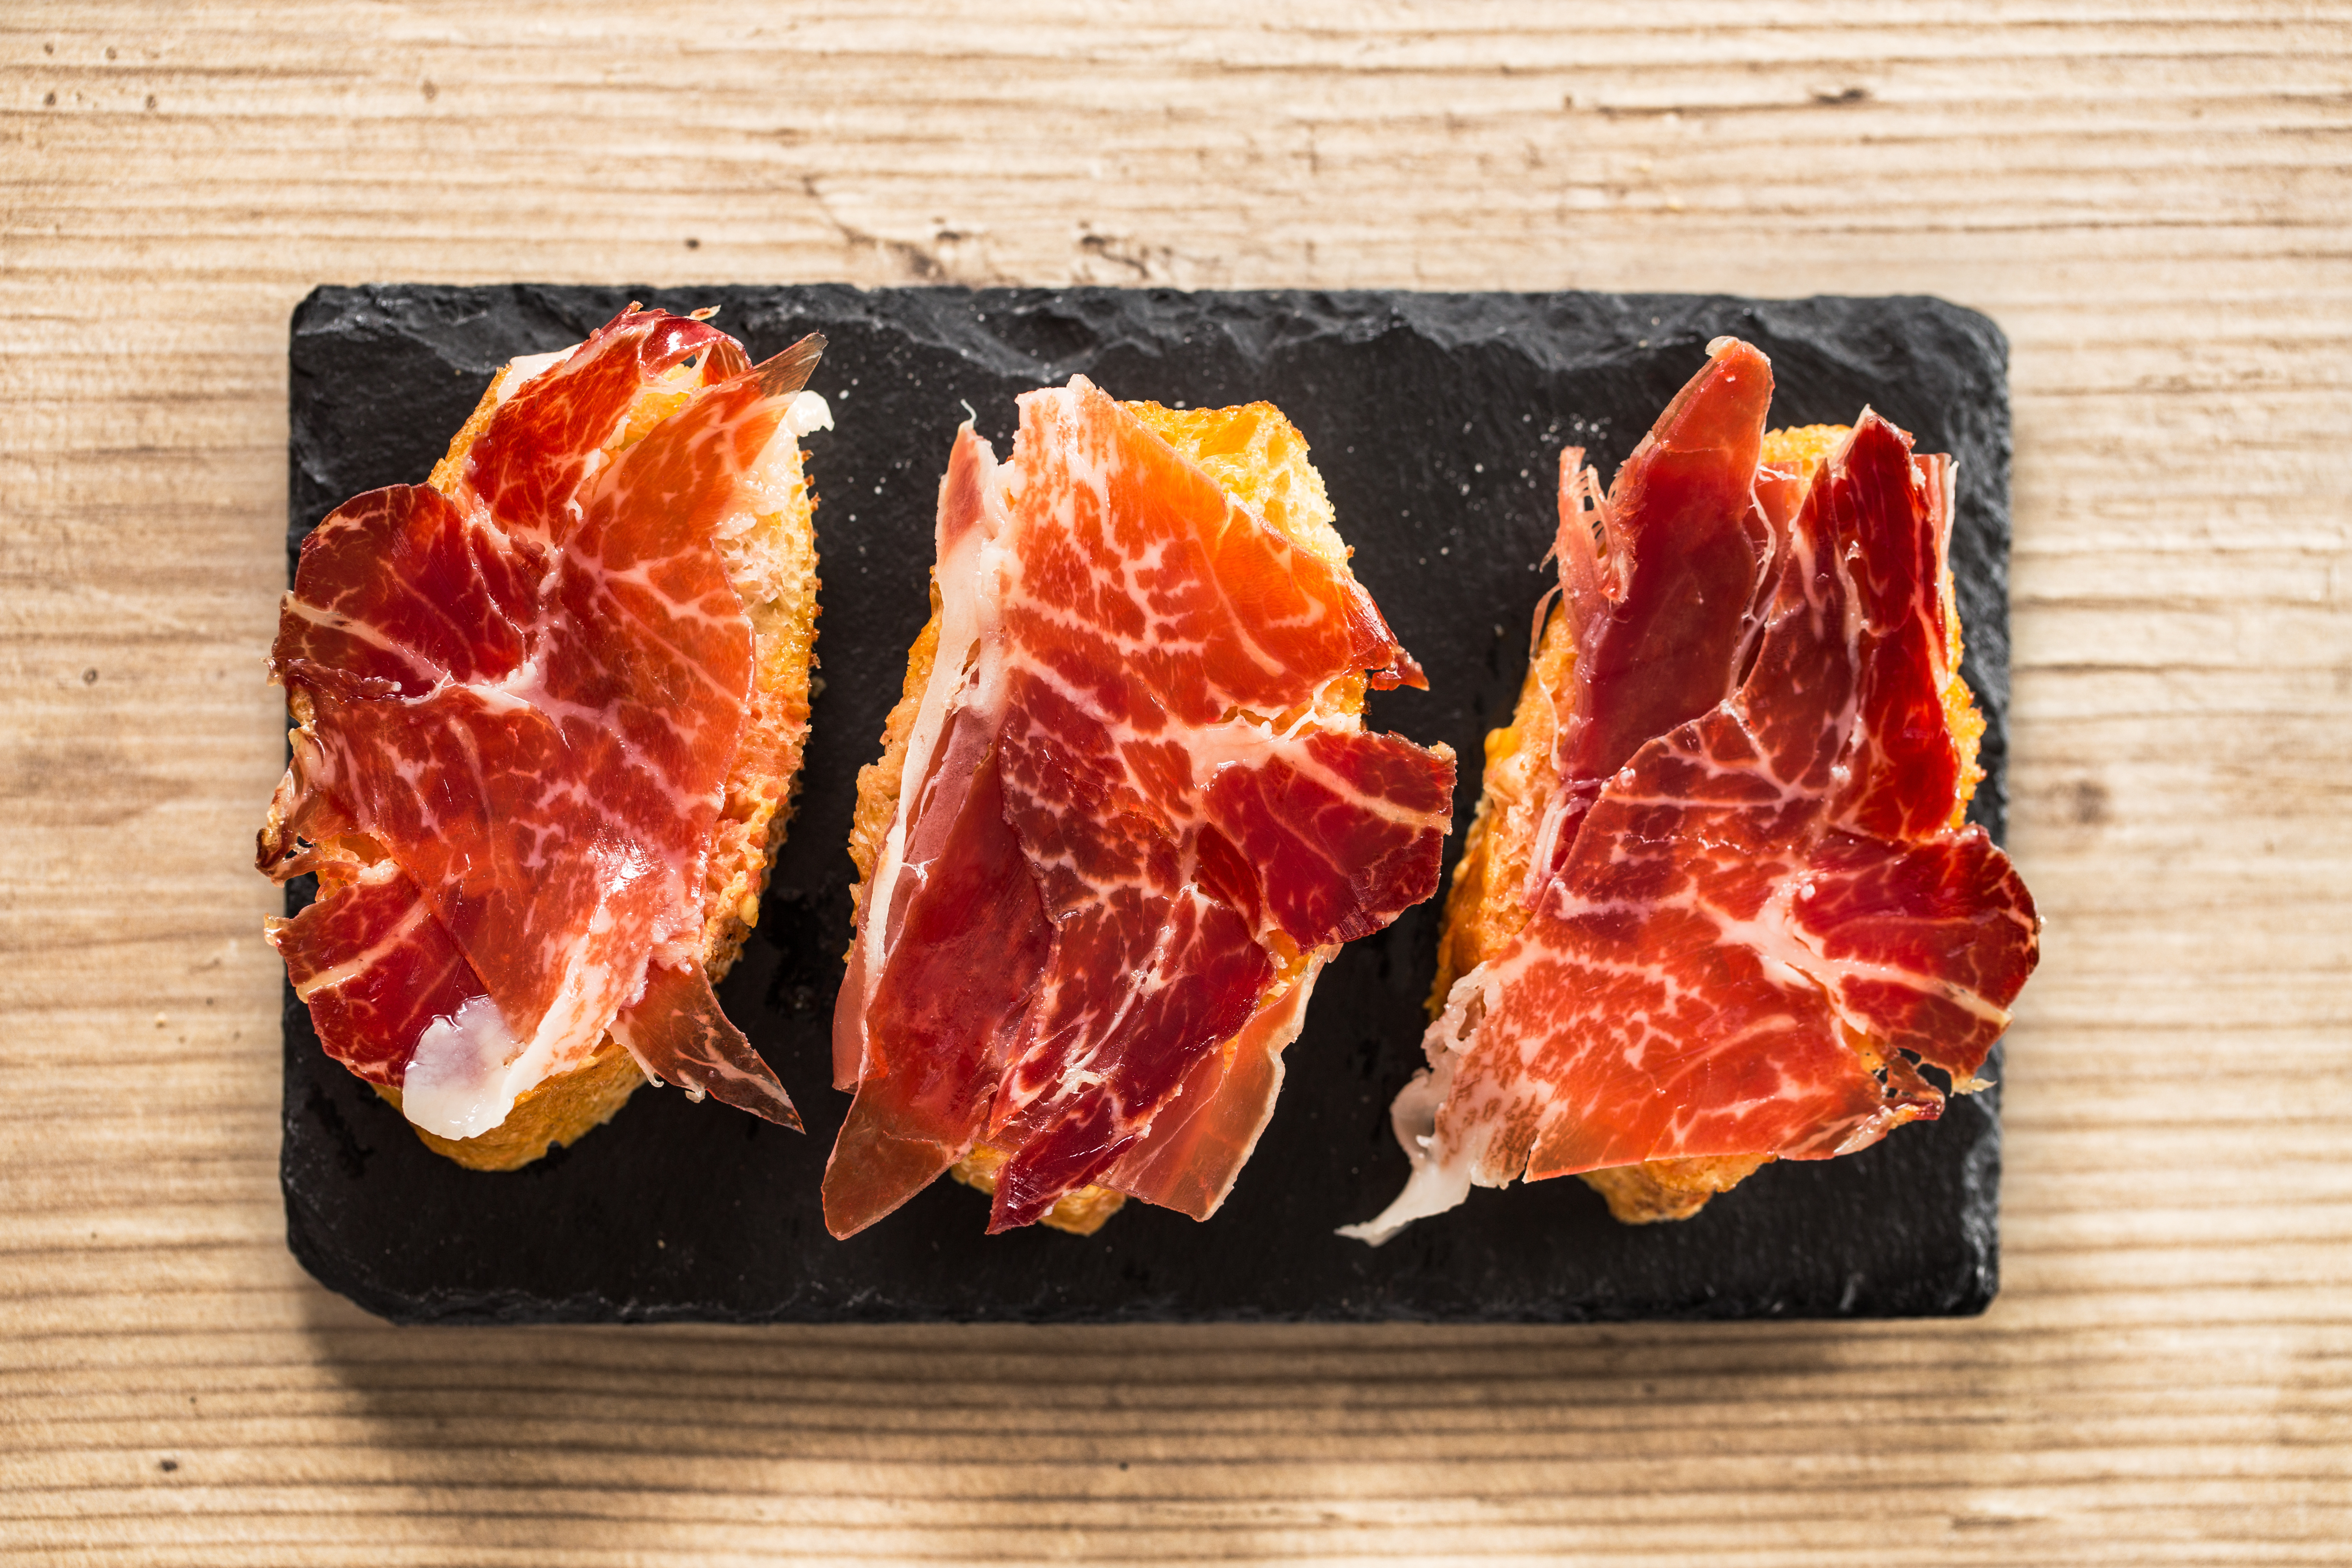 Jamon iberico tapas, top view on a wooden table